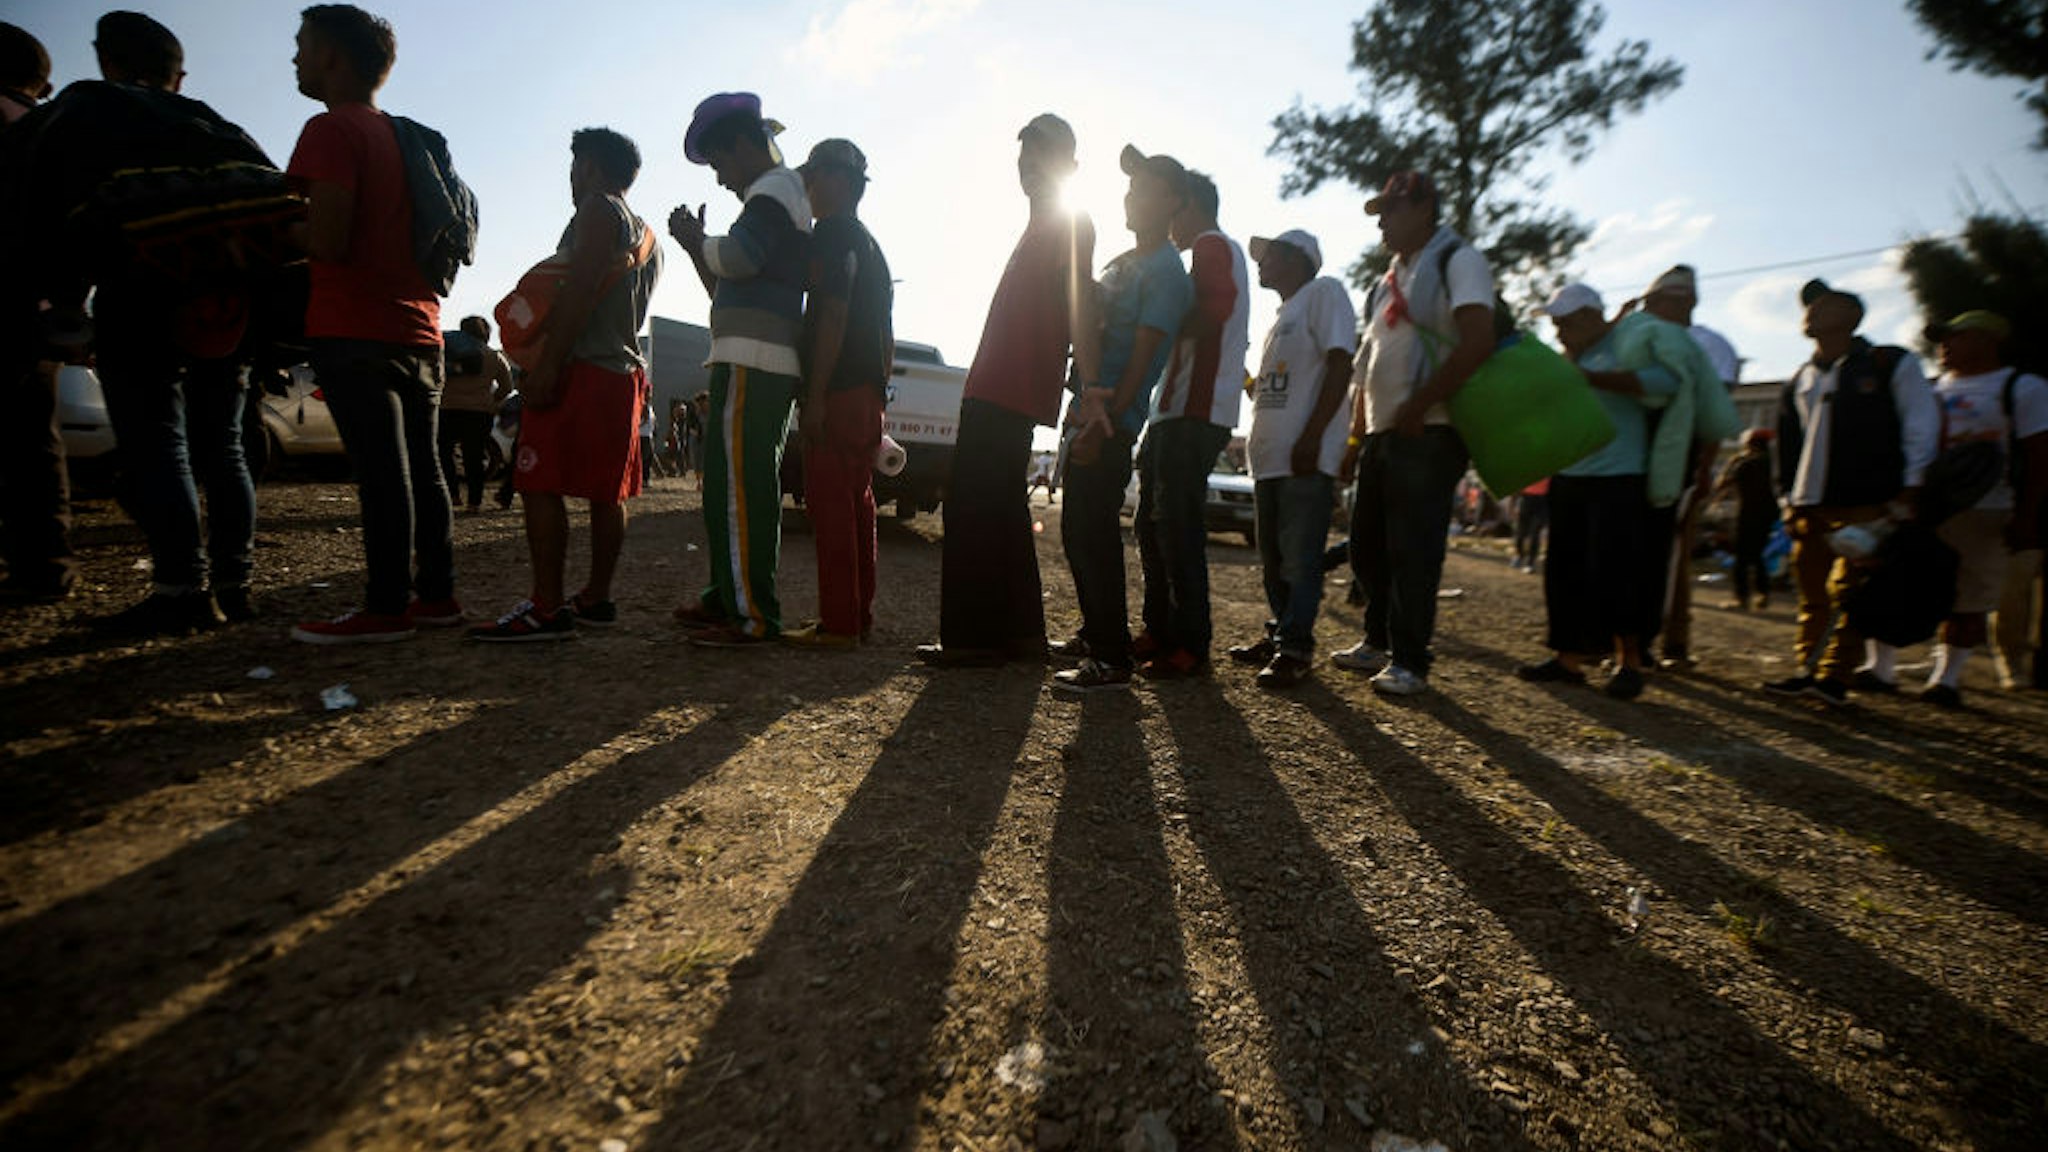 Central American migrants, taking part in a caravan heading to the US, queue to receive a meal at a temporary shelter in Irapuato, Guanajuato state, Mexico on November 11, 2018. - The trek from tropical Central America to the huge capital of Mexico is declining the health of the migrant caravan that endures extreme climate changes, as well as overcrowding and physical exhaustion, and still has to face the desert that leads to the United States. (Photo by ALFREDO ESTRELLA / AFP) (Photo credit should read ALFREDO ESTRELLA/AFP via Getty Images)